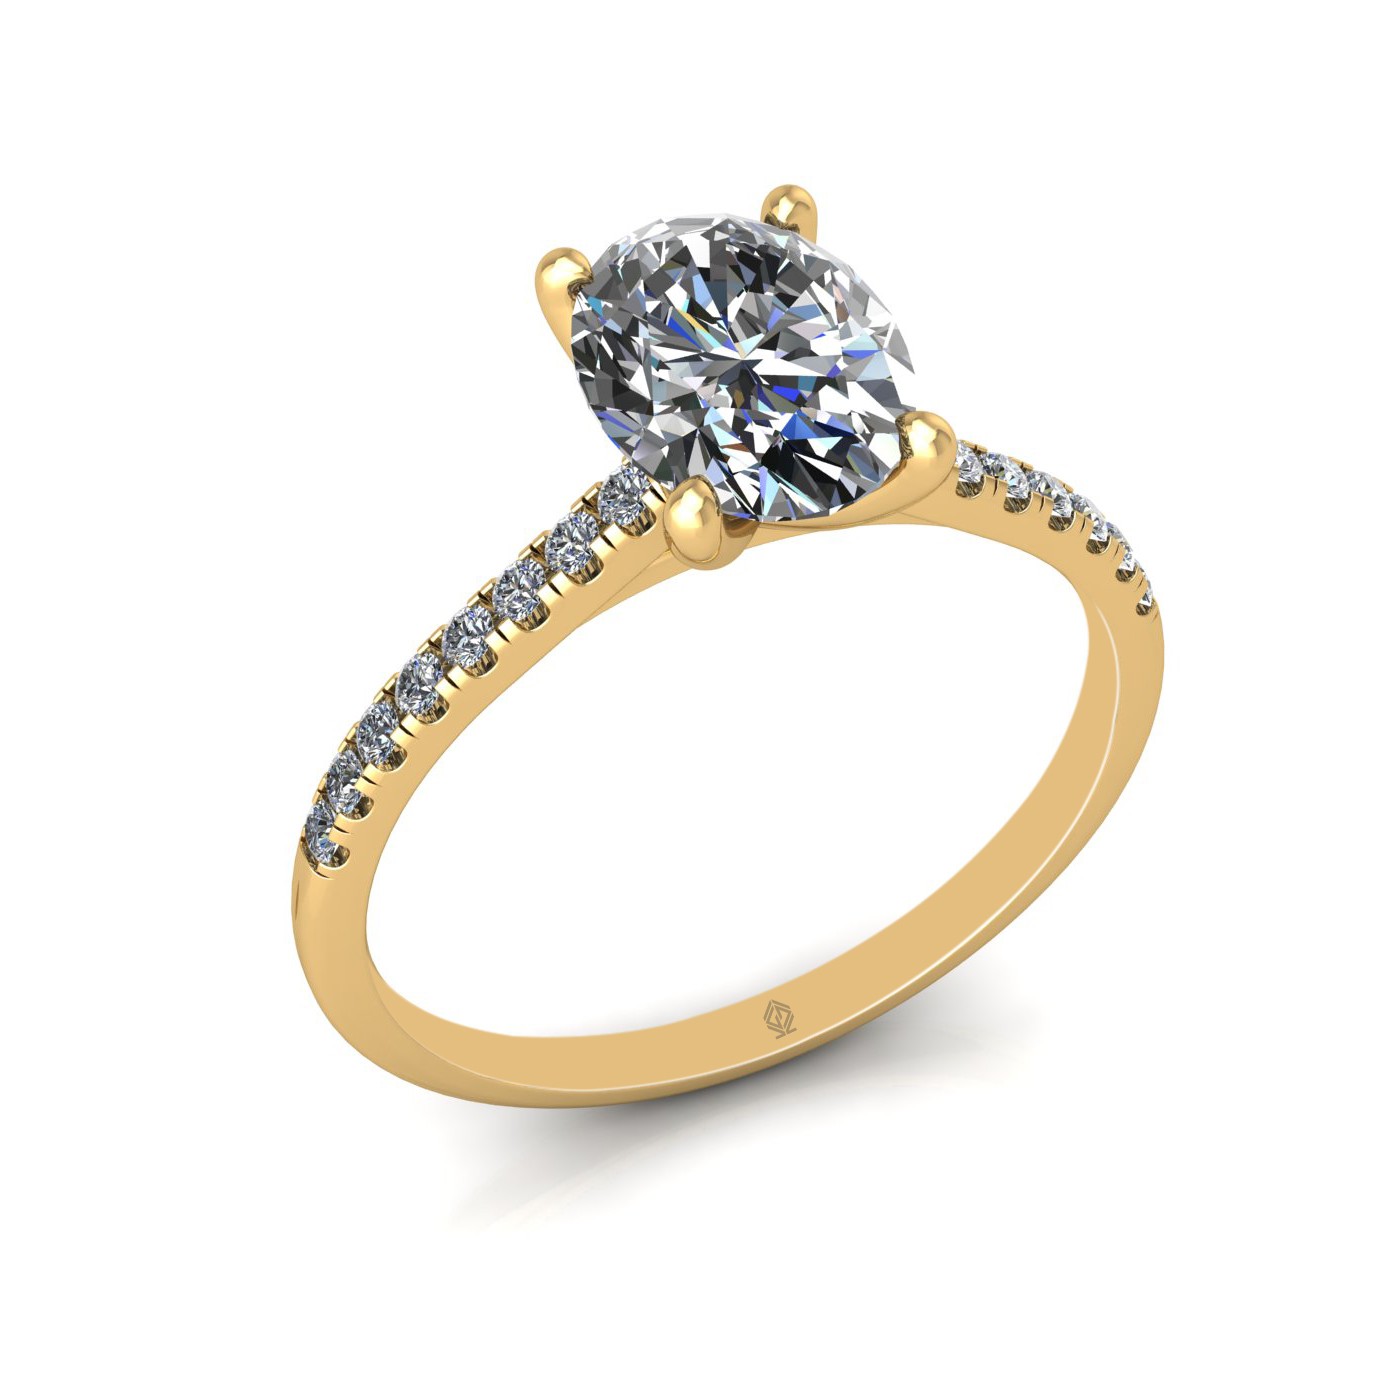 18k yellow gold  1,20 ct 4 prongs oval cut diamond engagement ring with whisper thin pavÉ set band